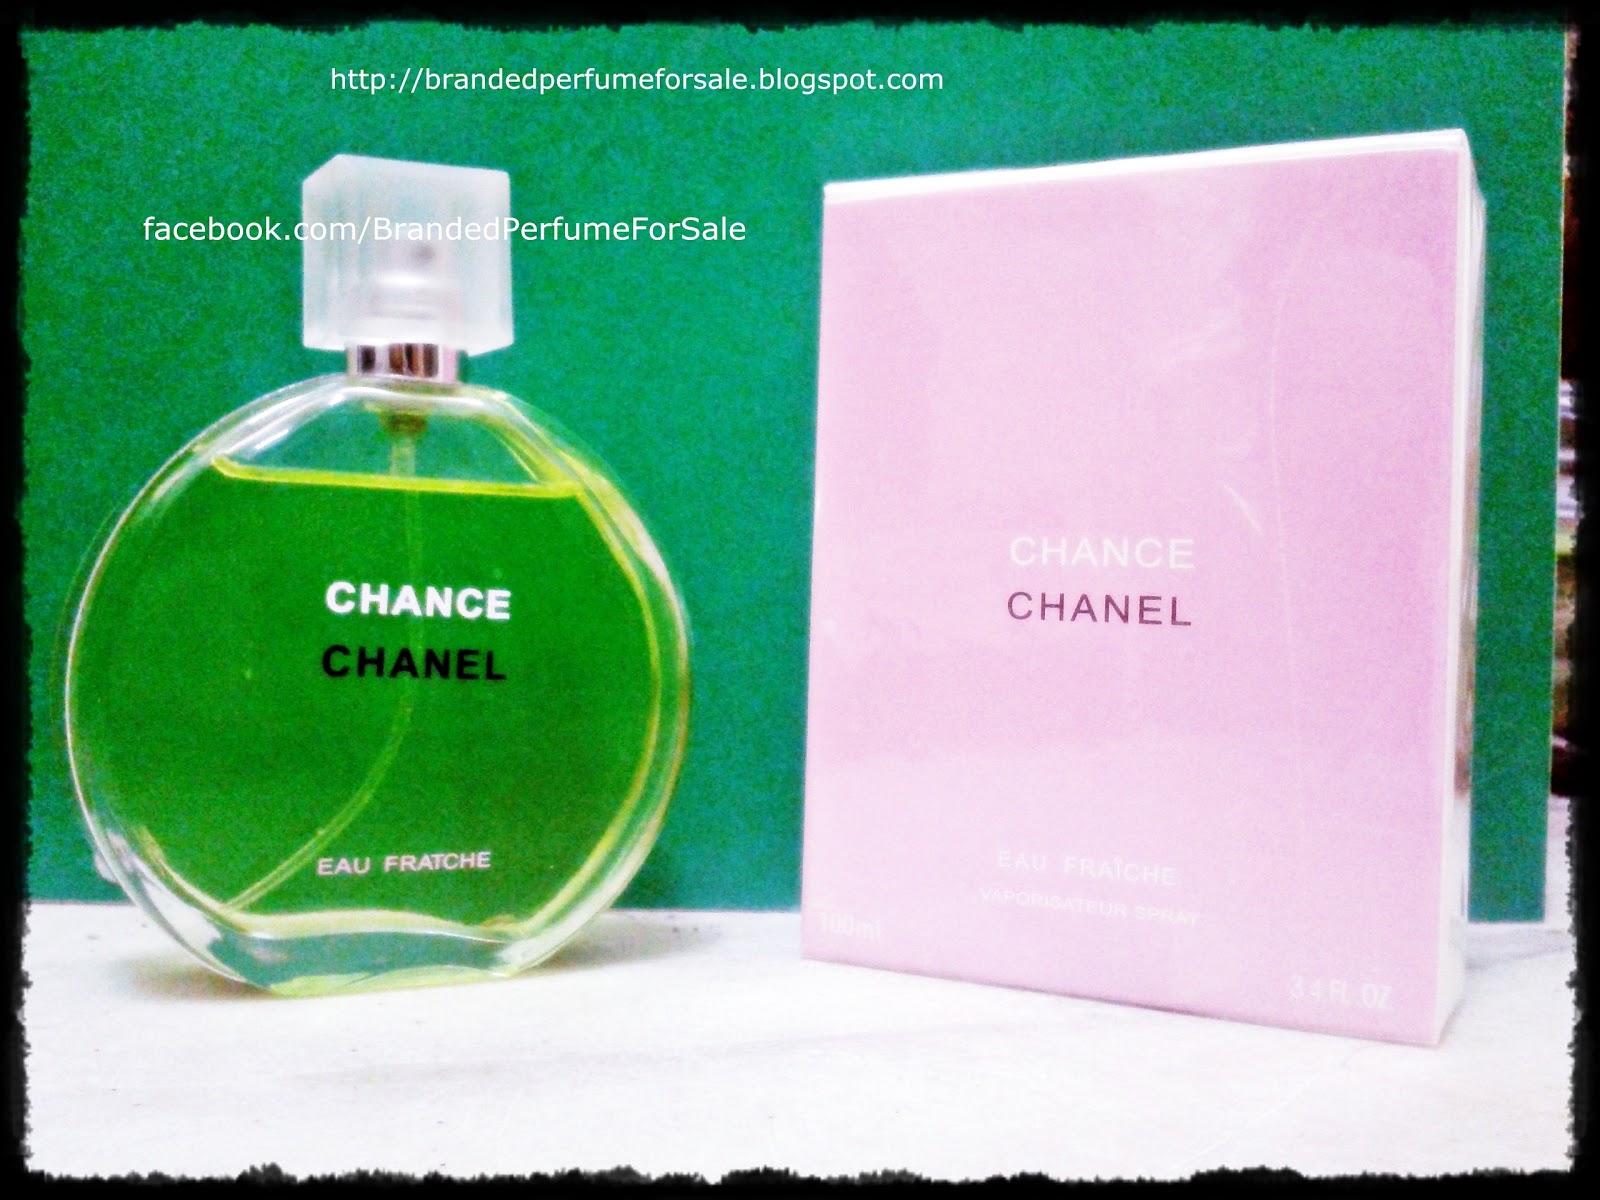 Chanel Chance - Branded Perfume For Sale